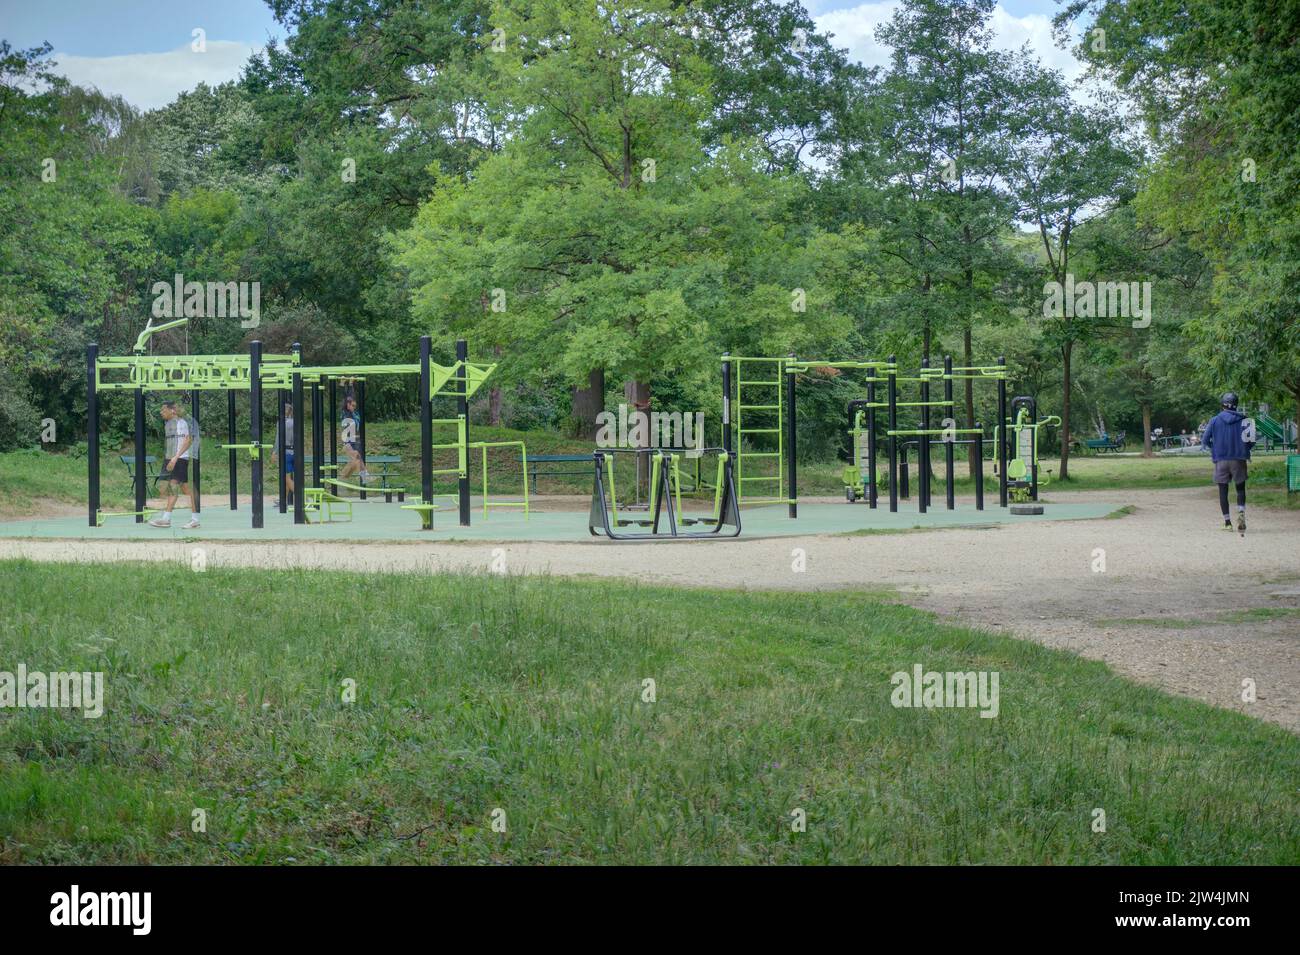 Paris, France - May 29, 2022: Outdoor gymnasium equipment for public use in Boise de Boulogne with motion blurred people exercising Stock Photo